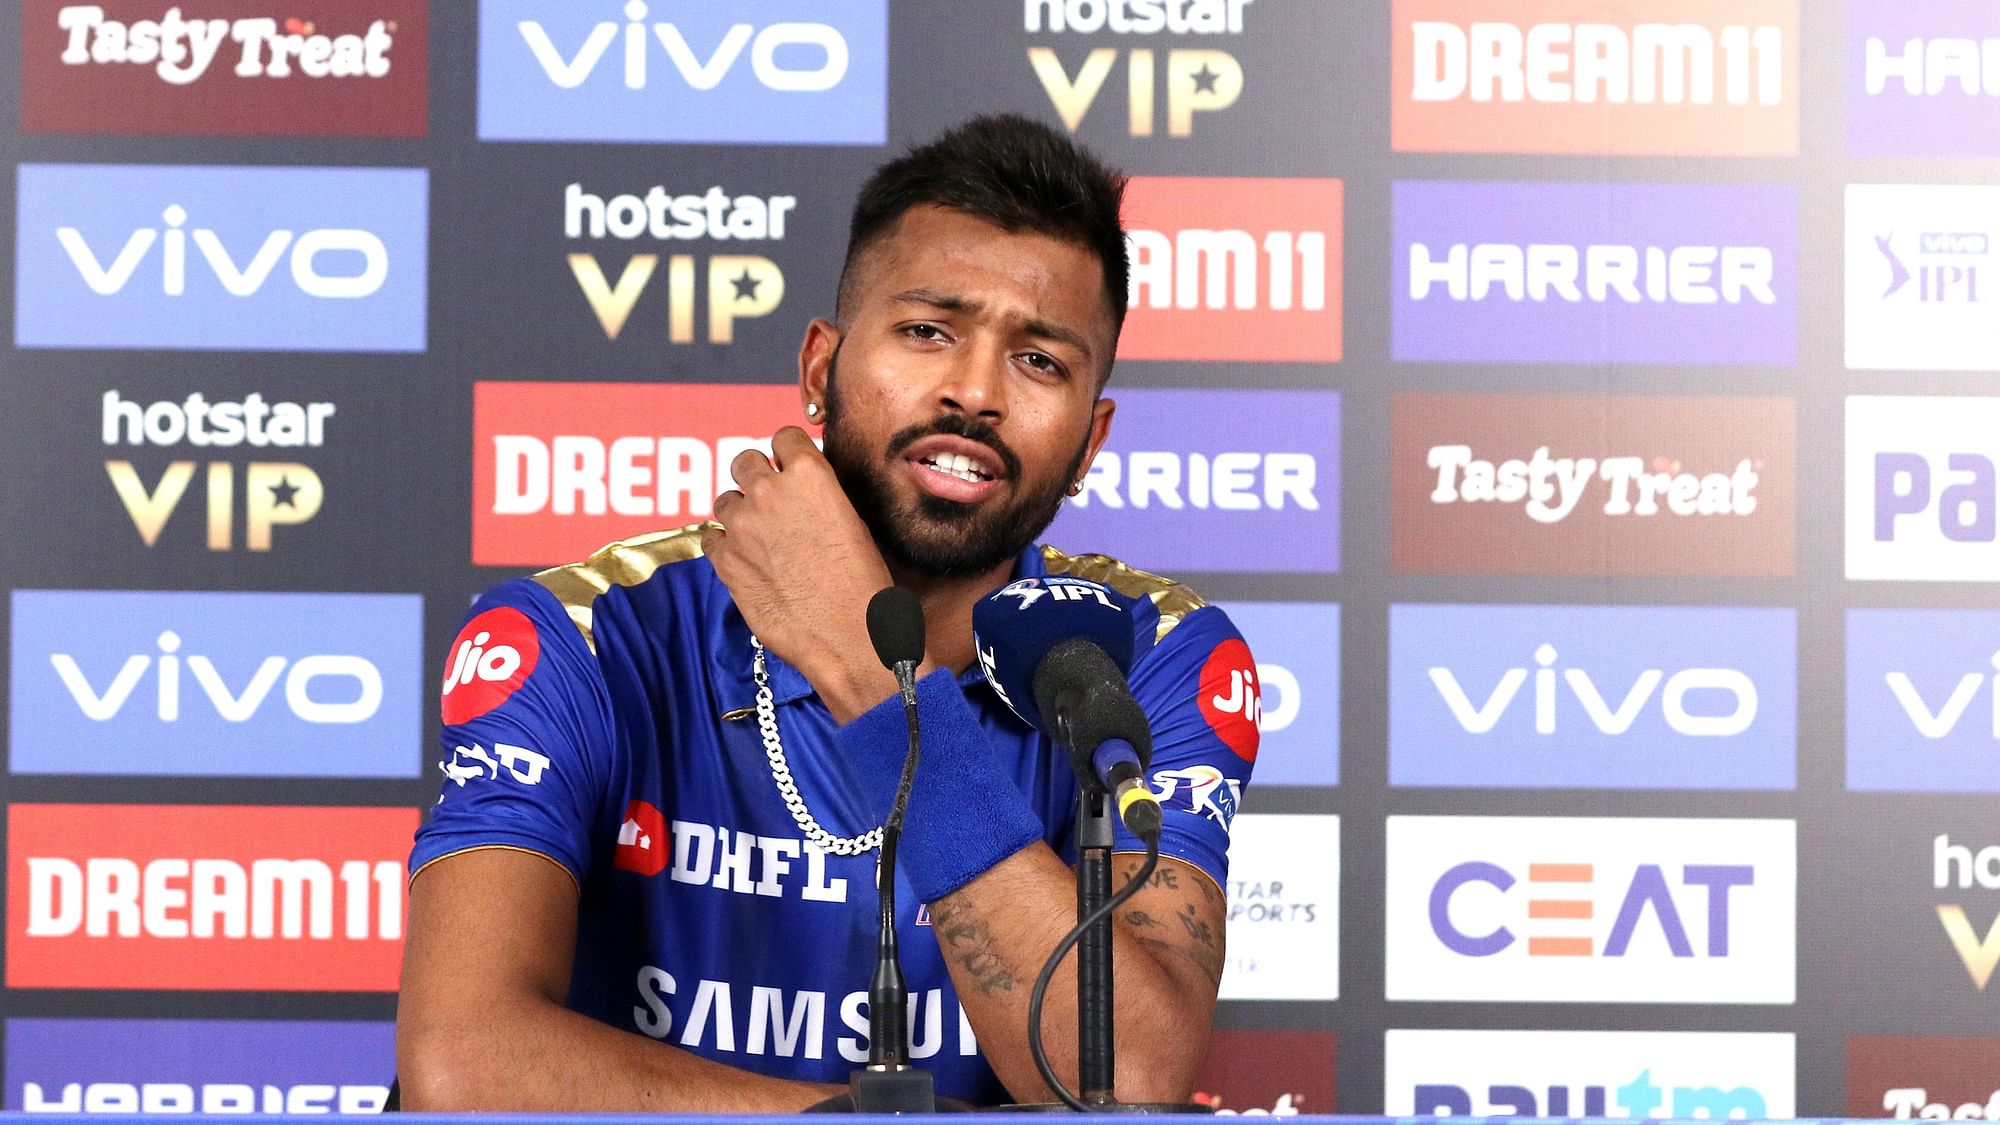 Hardik Pandya during the press conference after defeating Royal Challengers Bangalore.